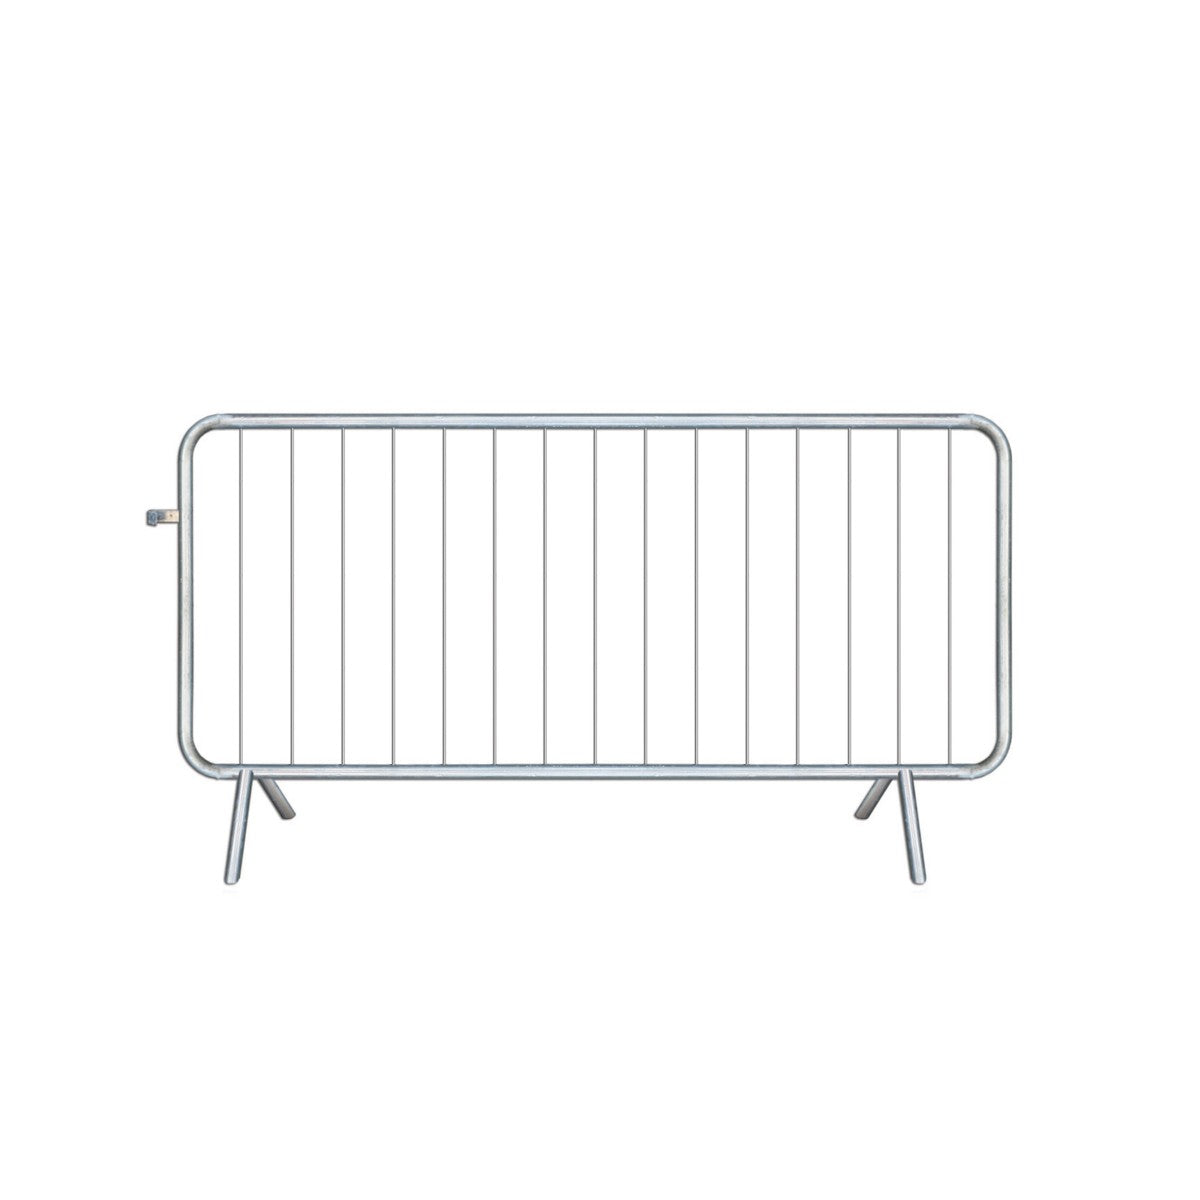 Eco 2.3m Crowd Control Barrier